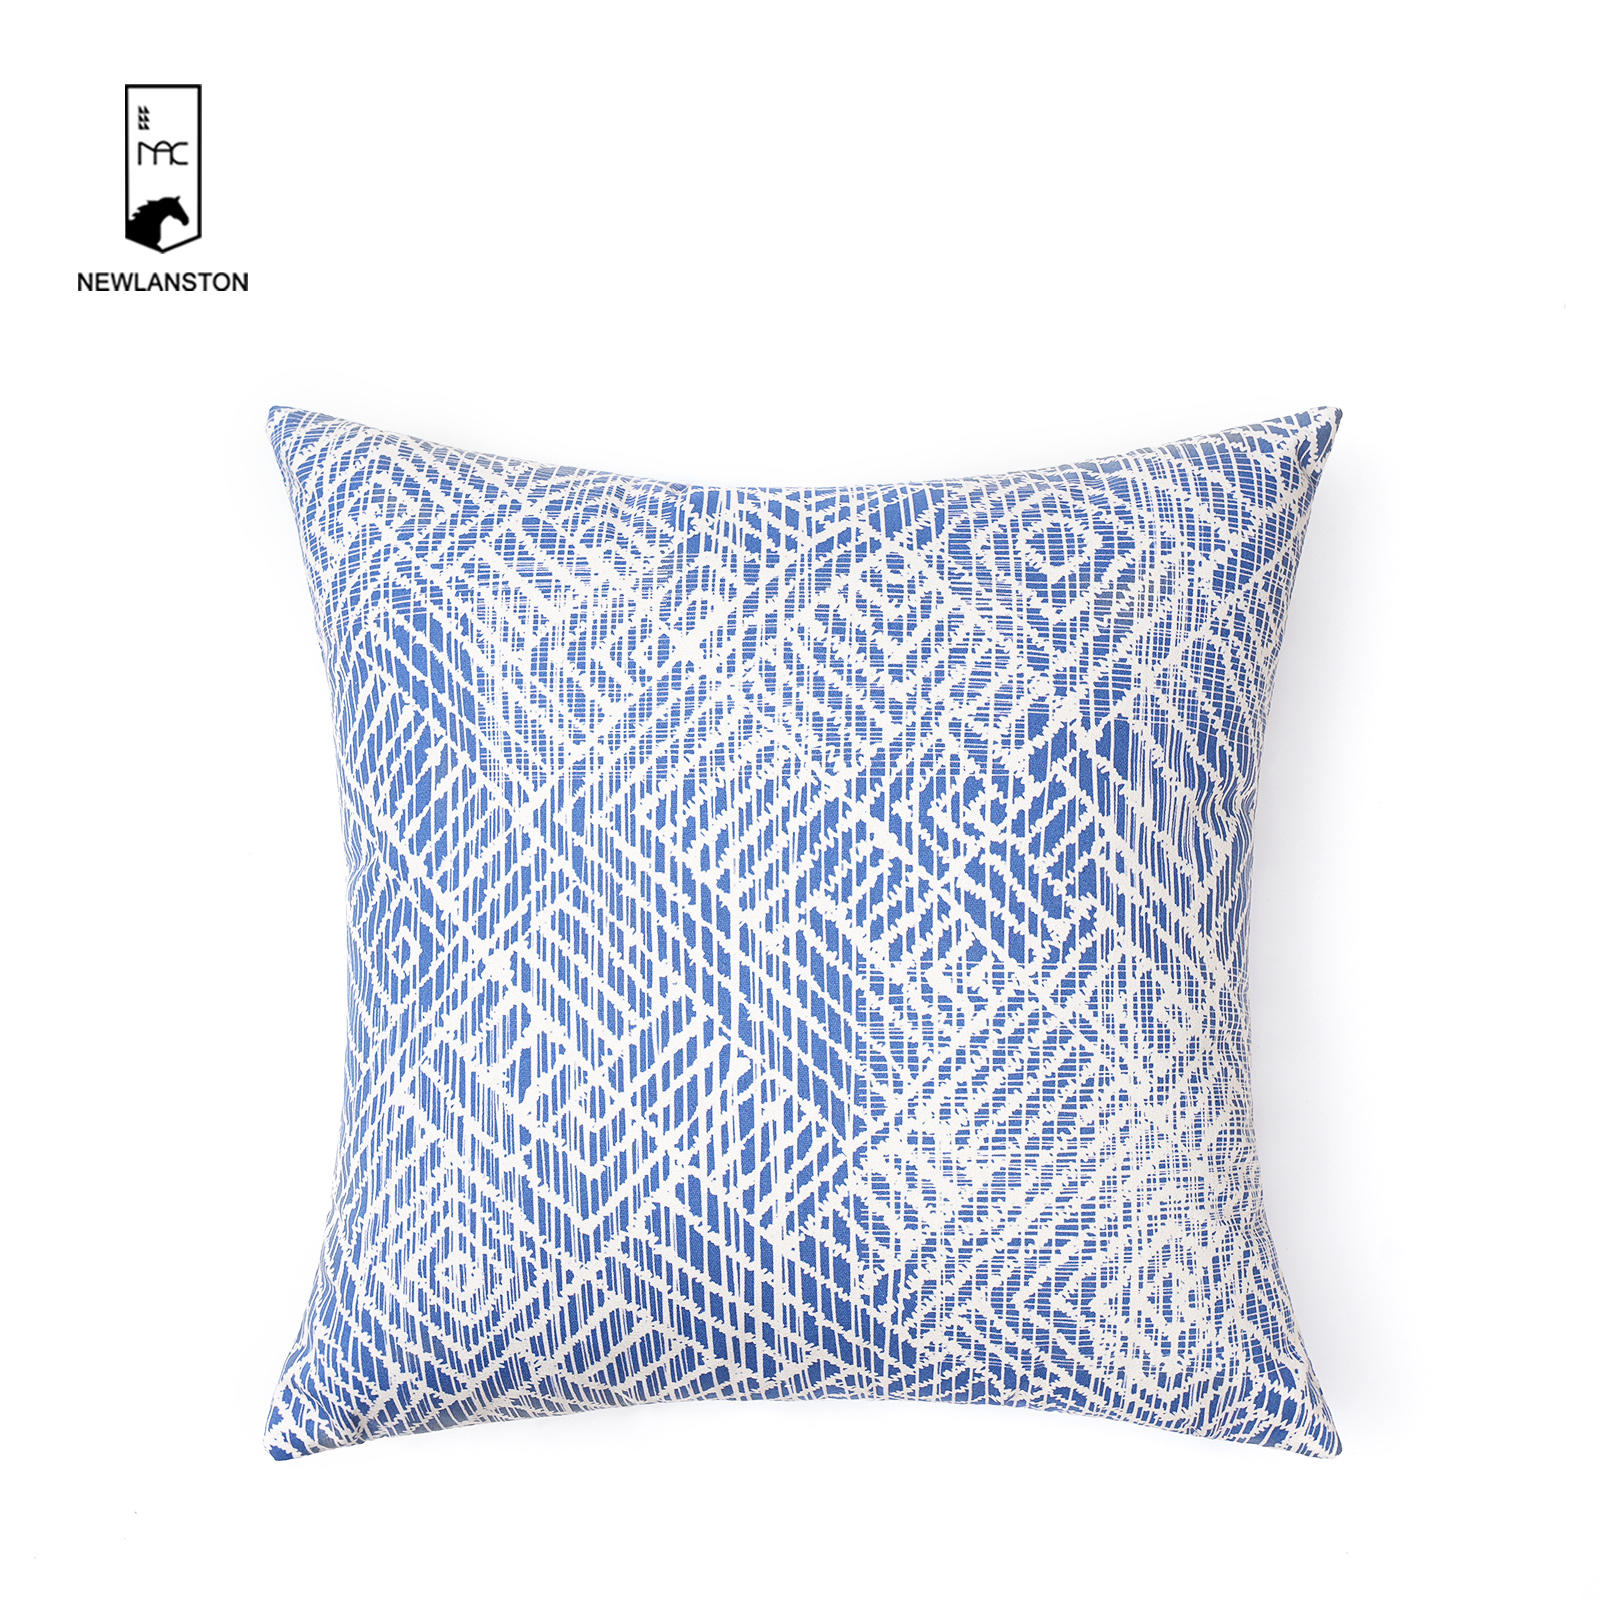 45x45 Digital printed recycled cotton Geometric Cushion/Pillow cover 